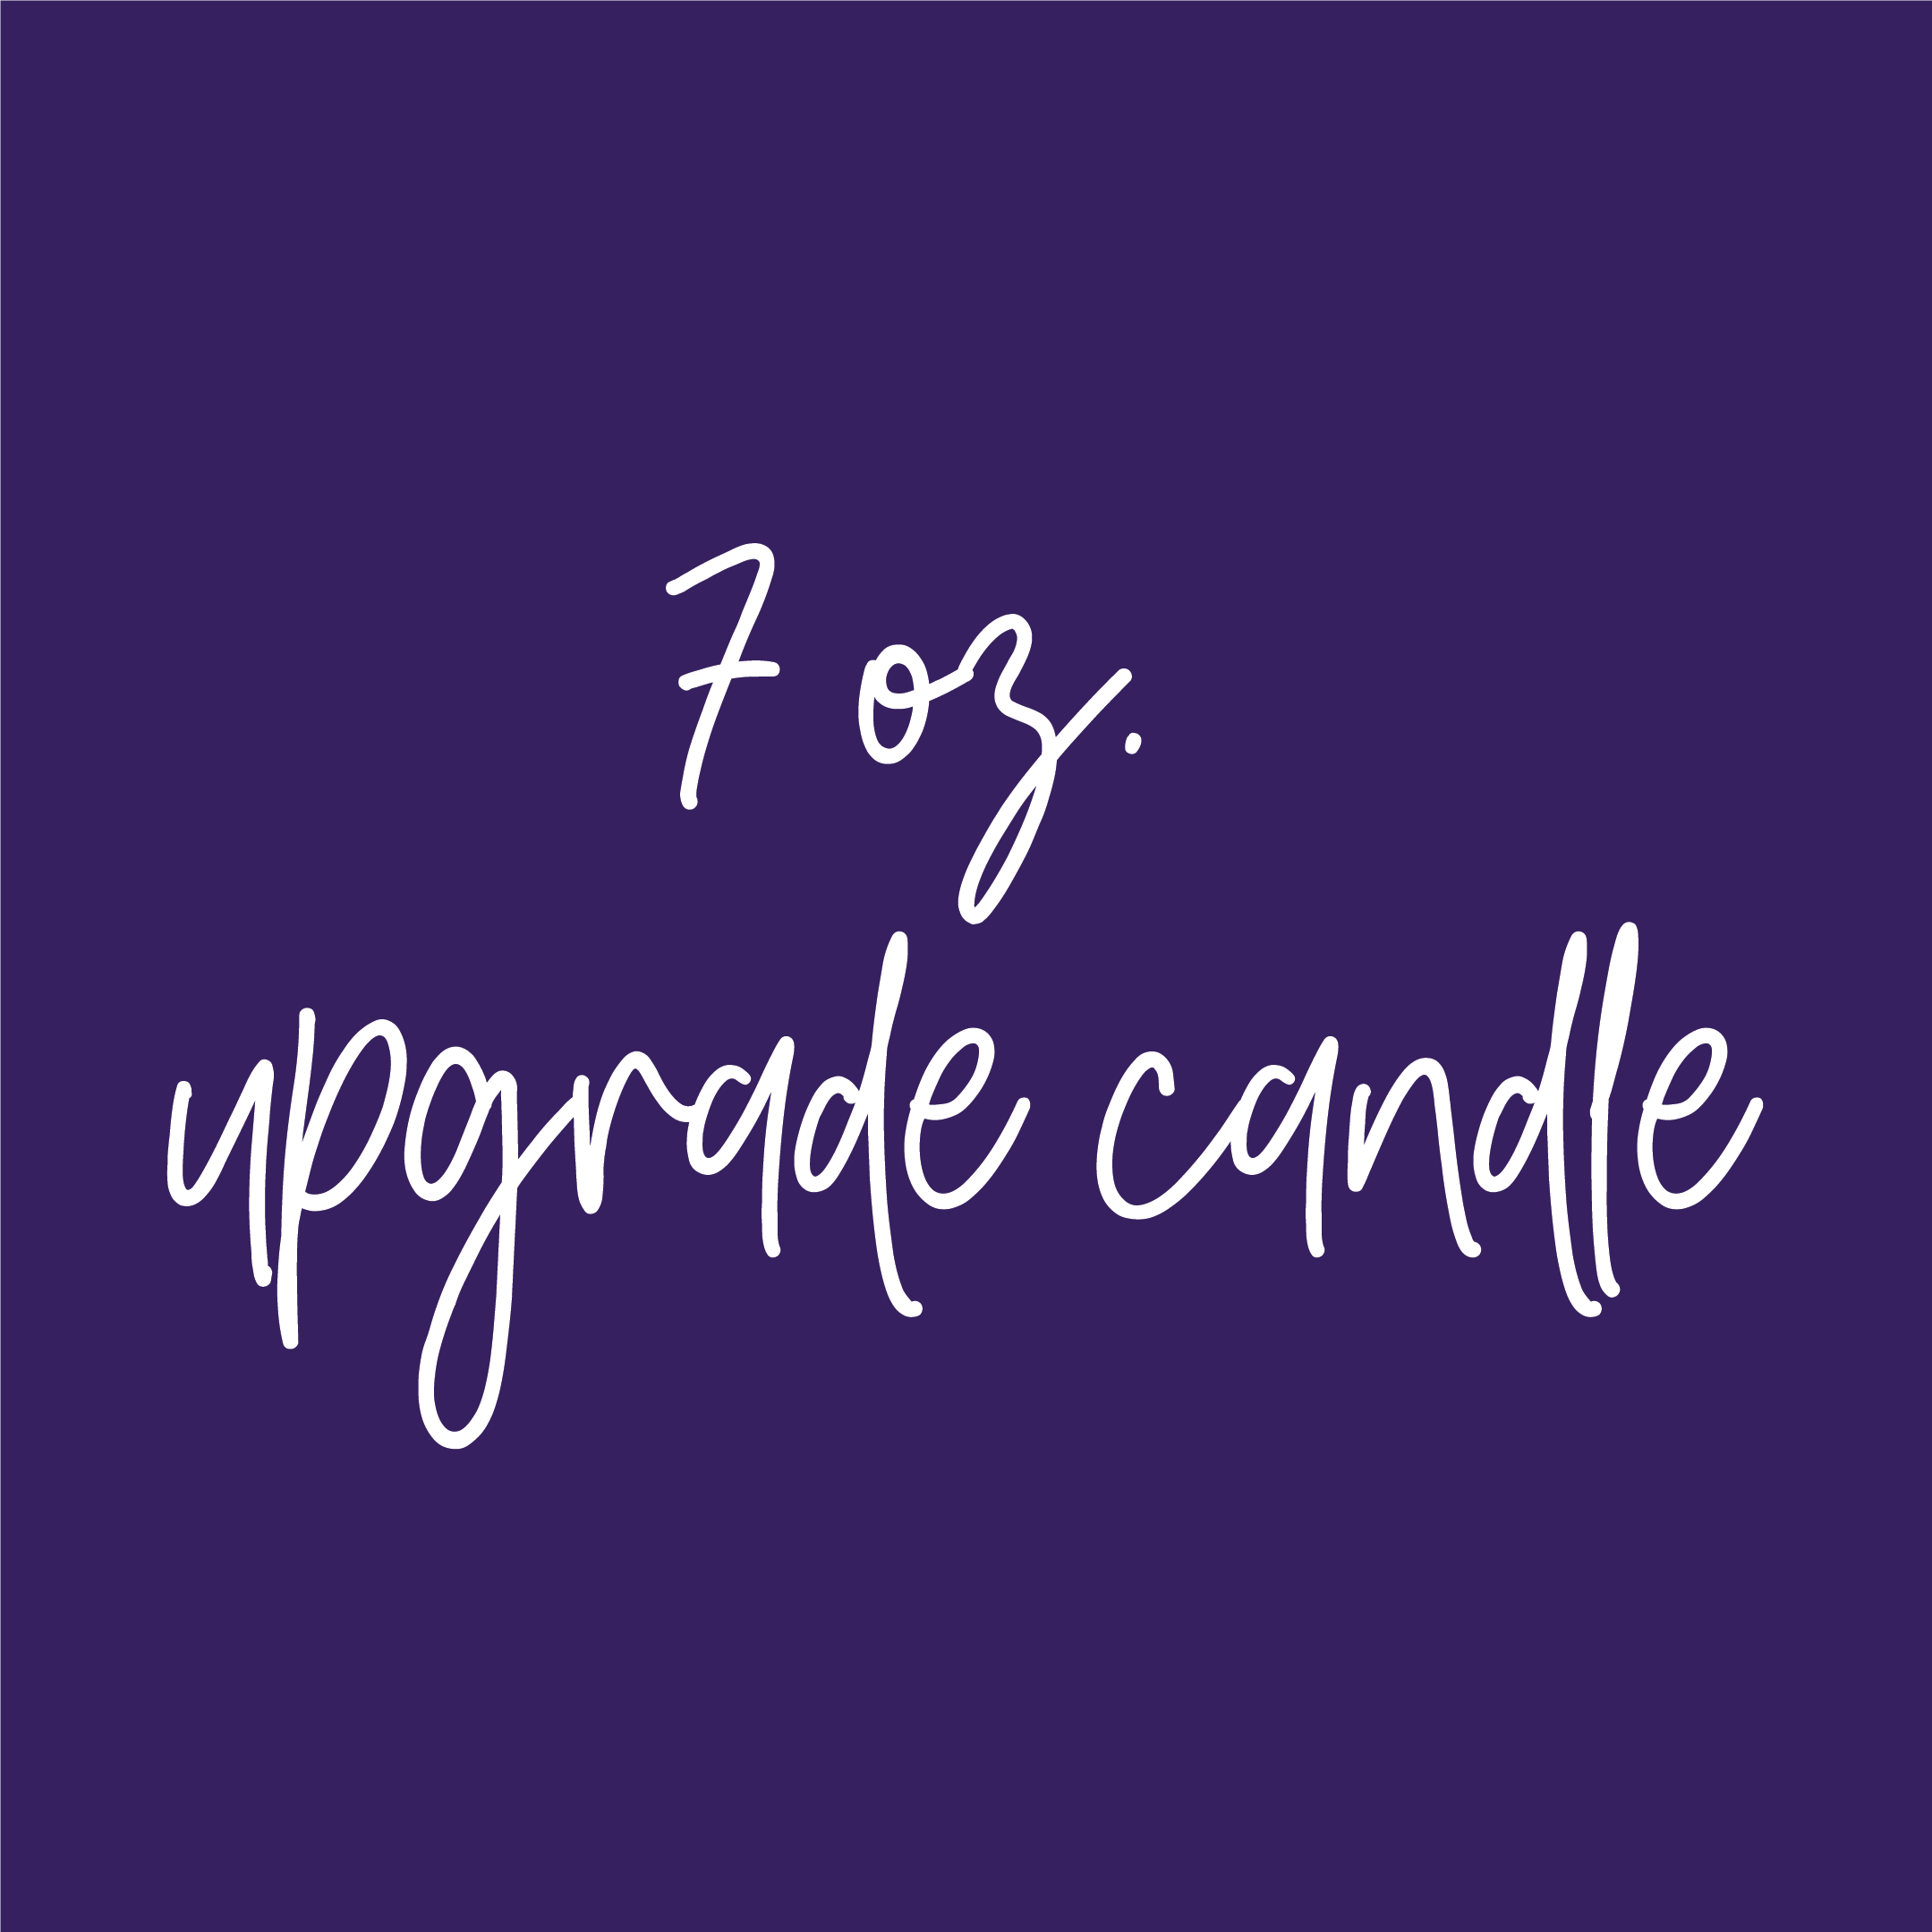 Re-order 7 oz. upgrade candle